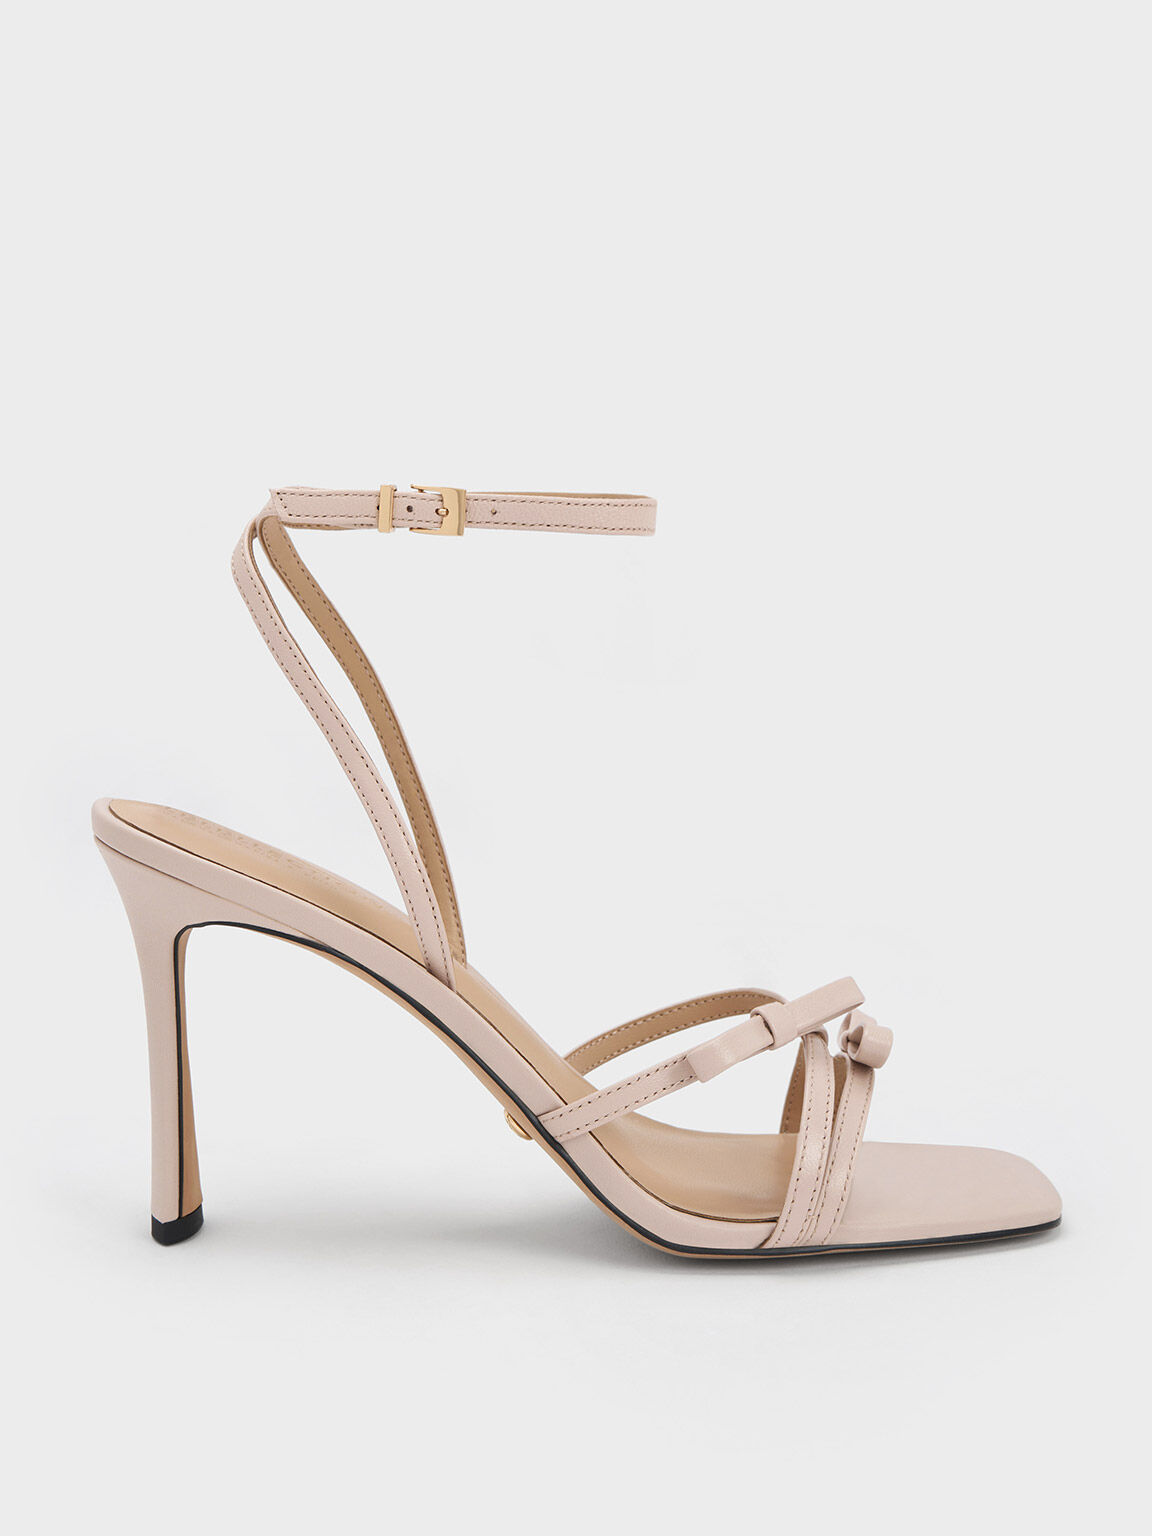 Giày sandals cao gót Leather Bow Strappy, Nude, hi-res